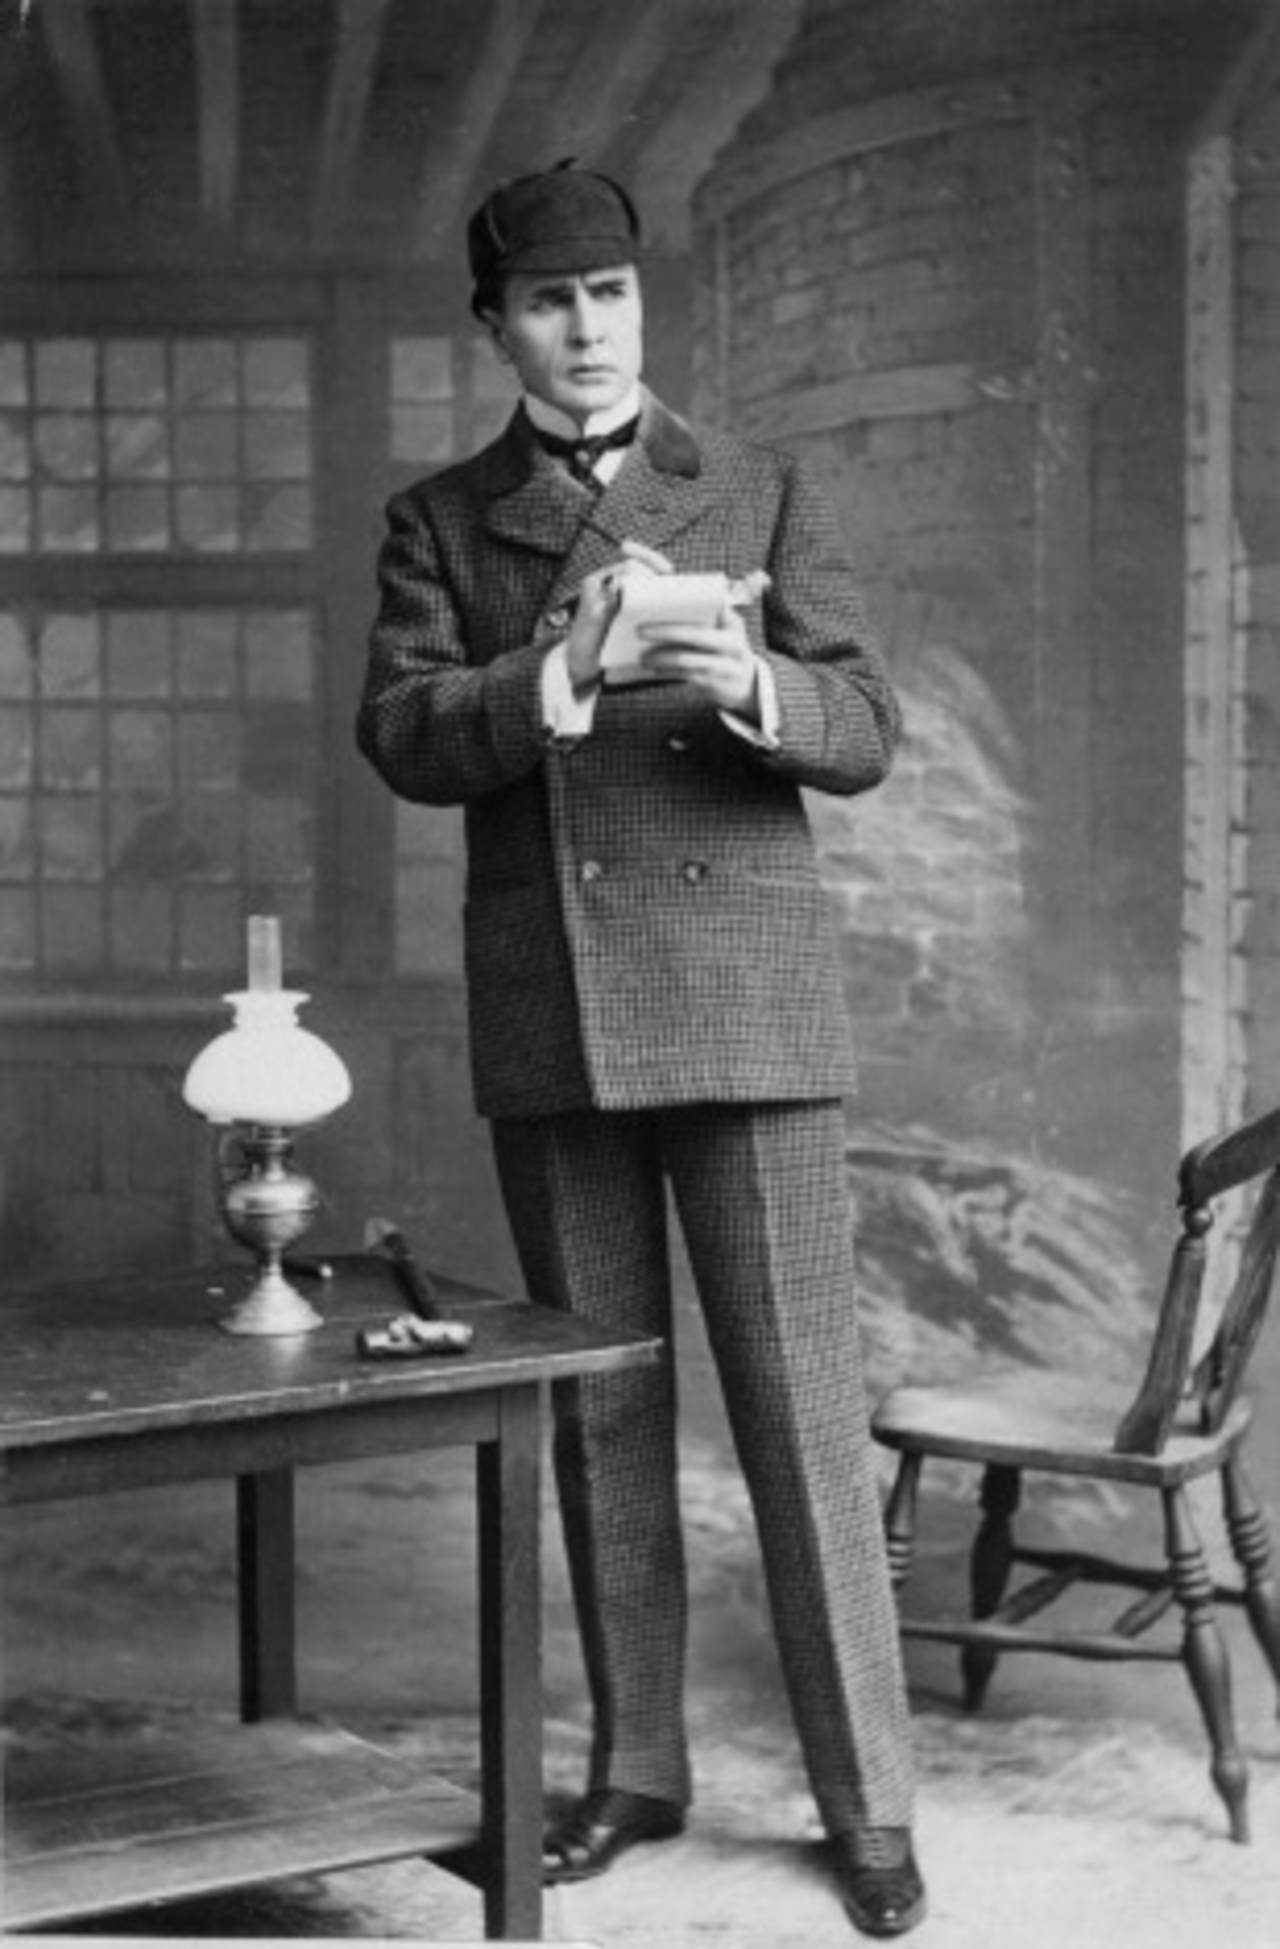 Actor William Gillette playing the detective Sherlock Holmes, 1899